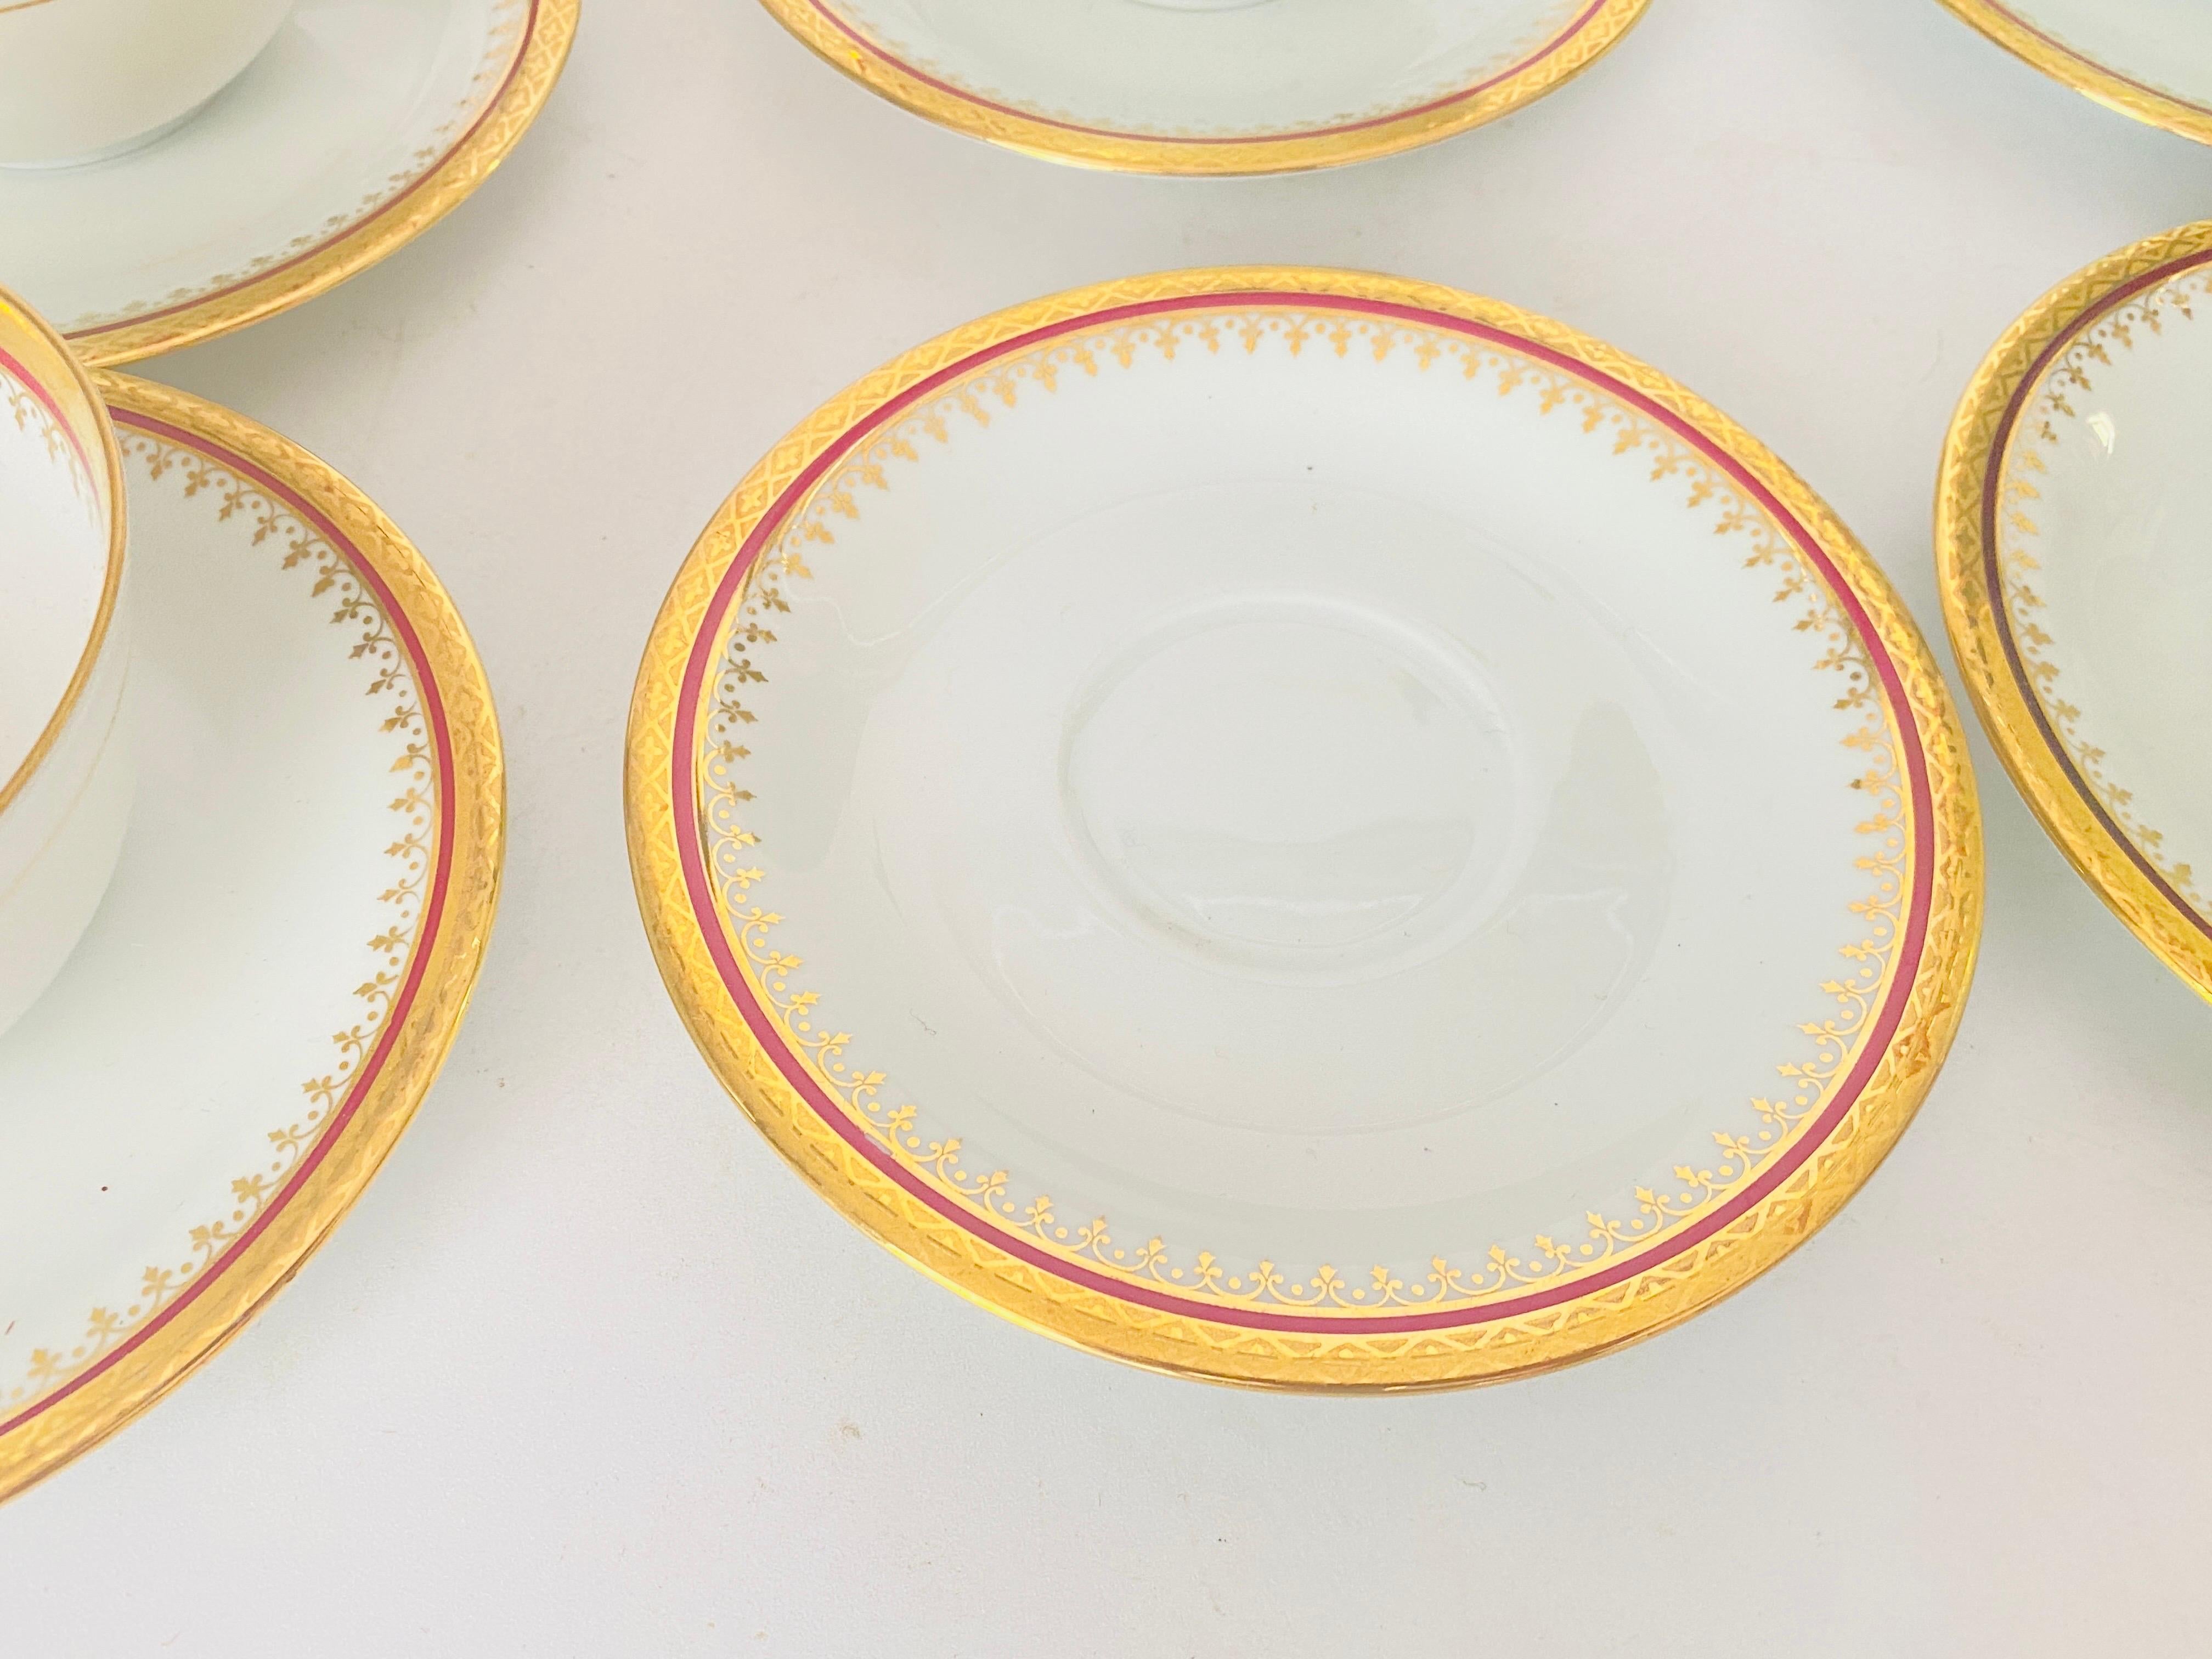 Neoclassical Midcentury Limoges Coffee Cup and under Plates in Porcelain and Gold 12 Pieces